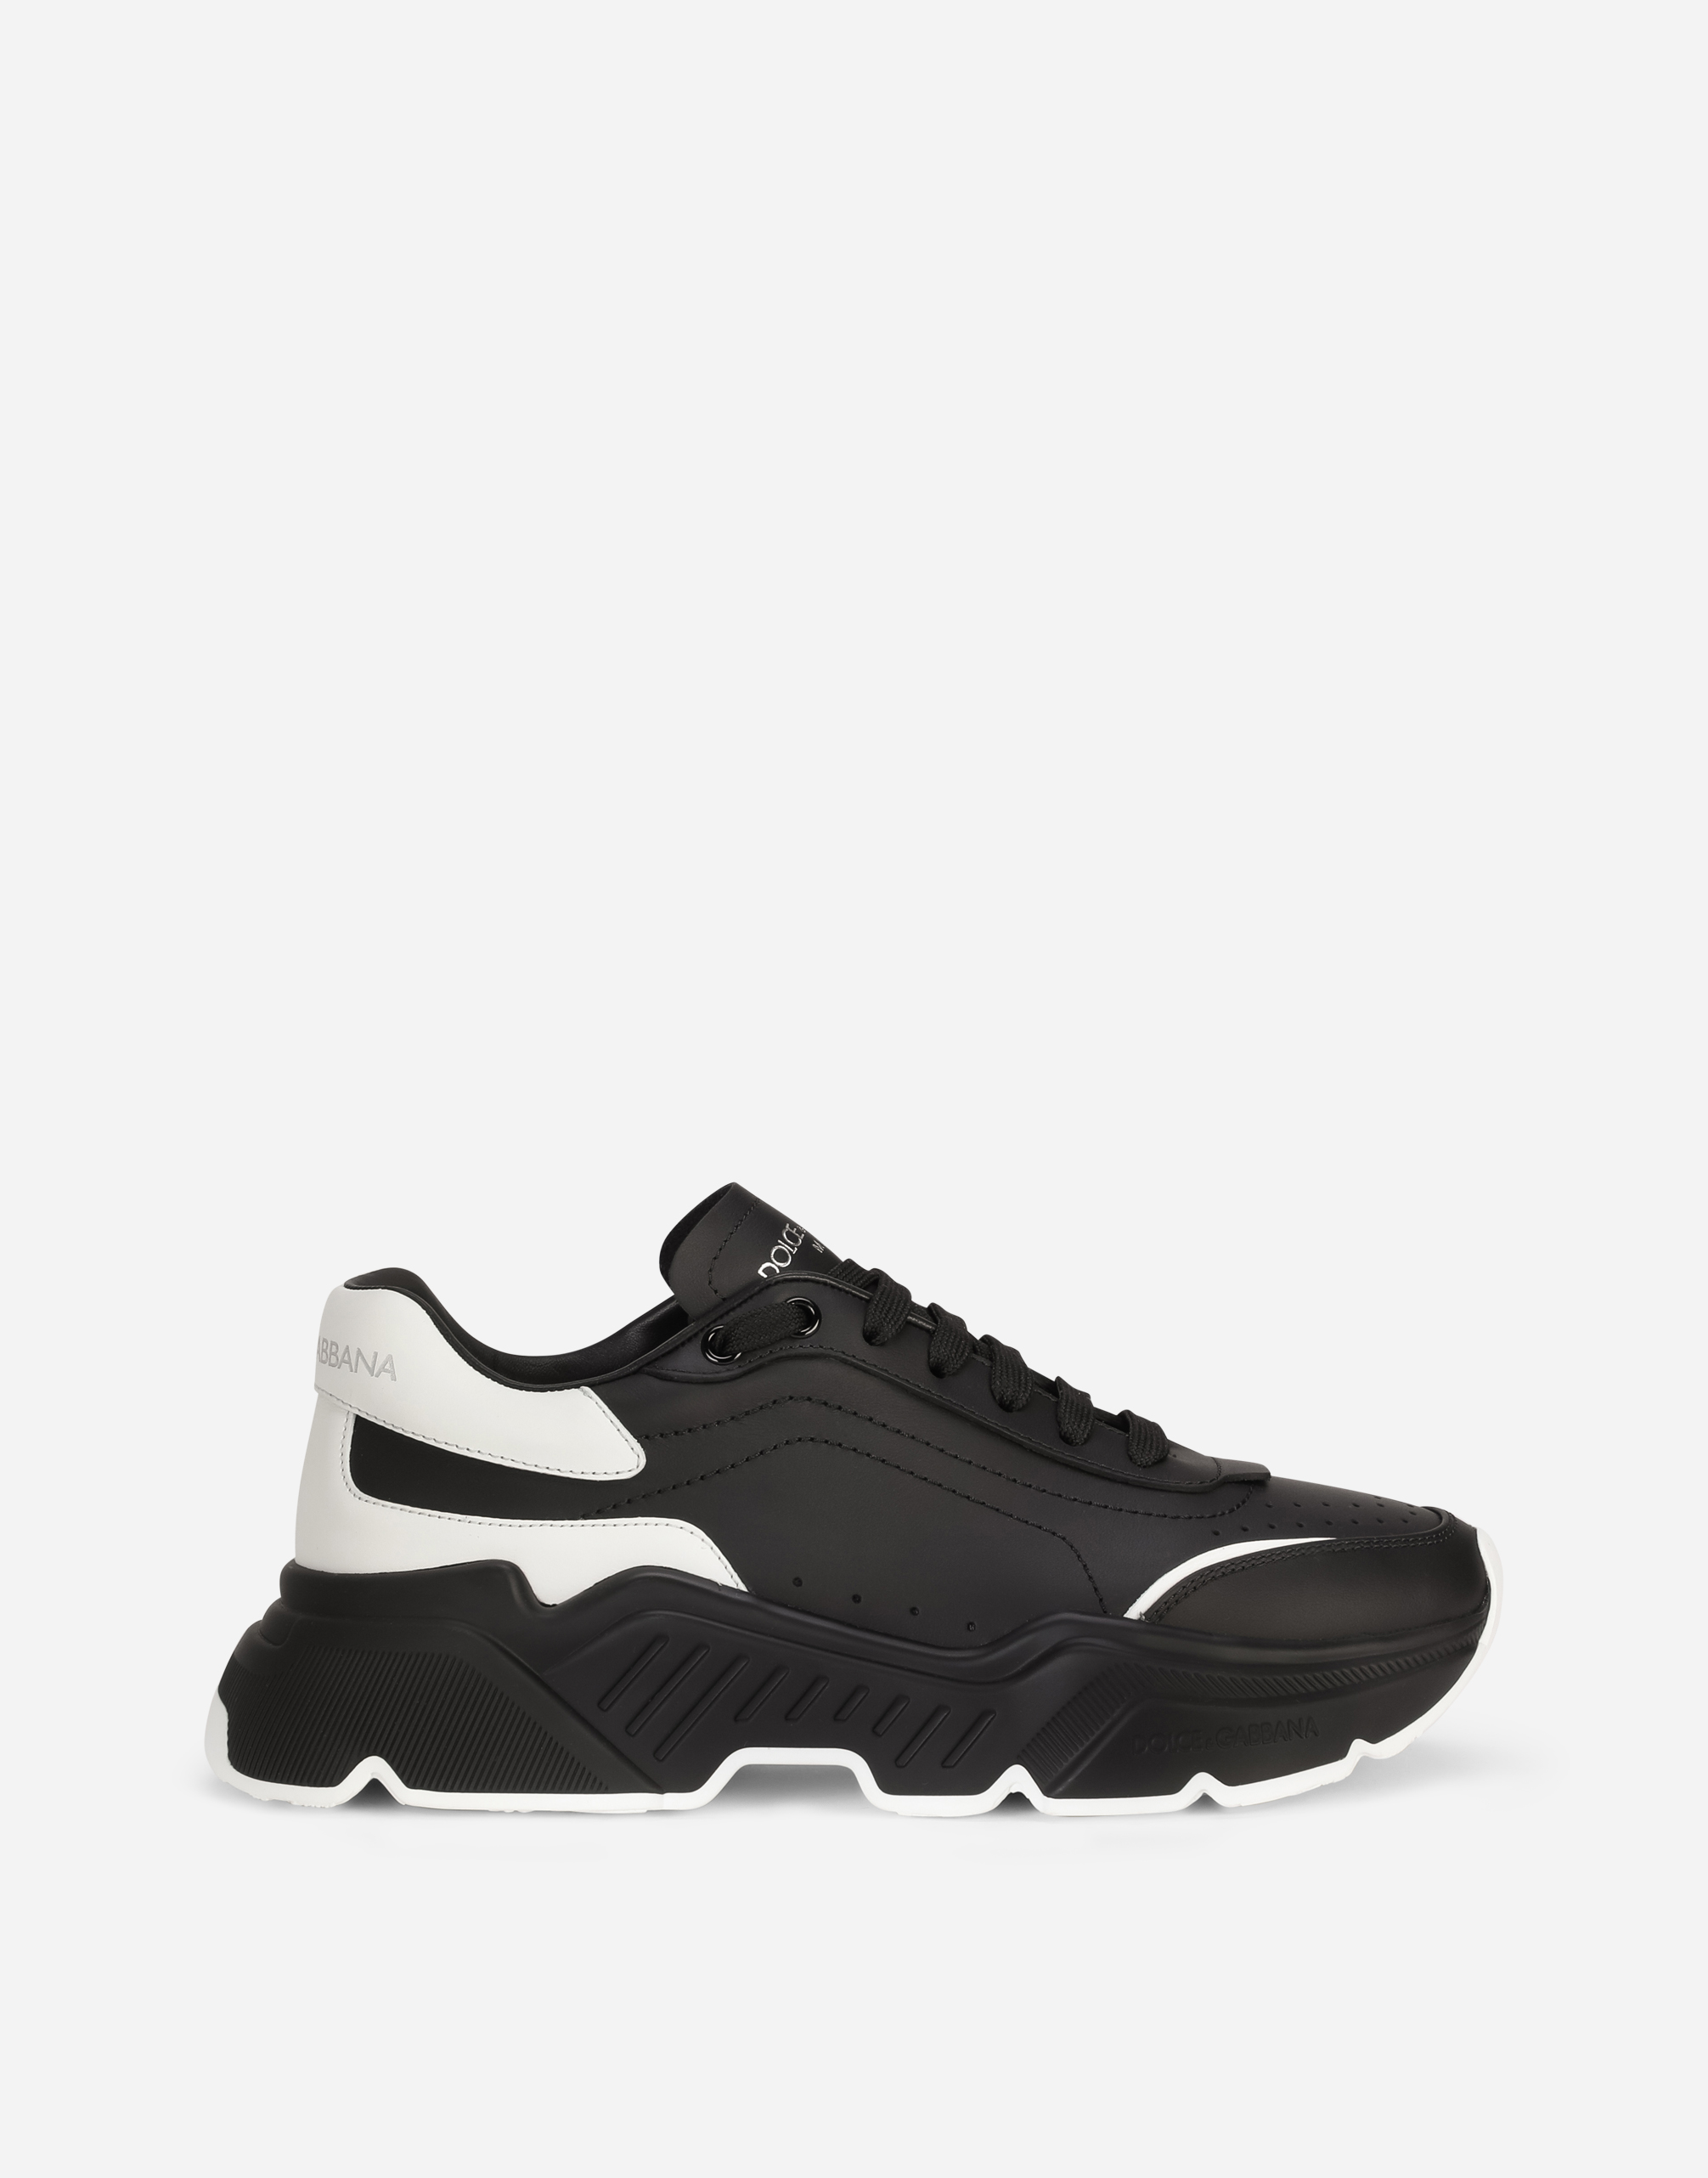 Nappa leather Daymaster sneakers in Black/White